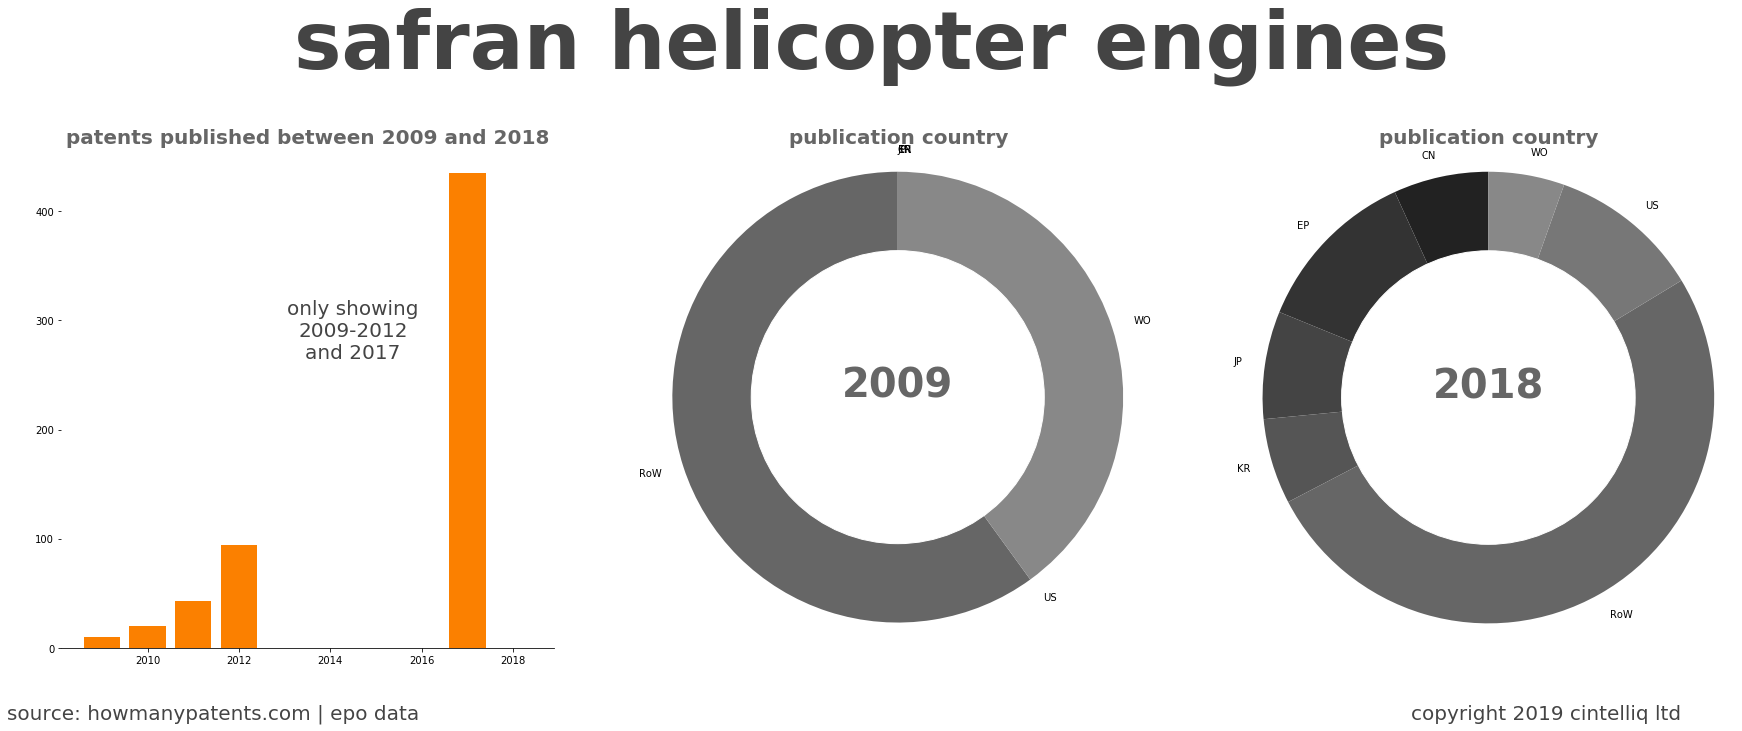 summary of patents for Safran Helicopter Engines